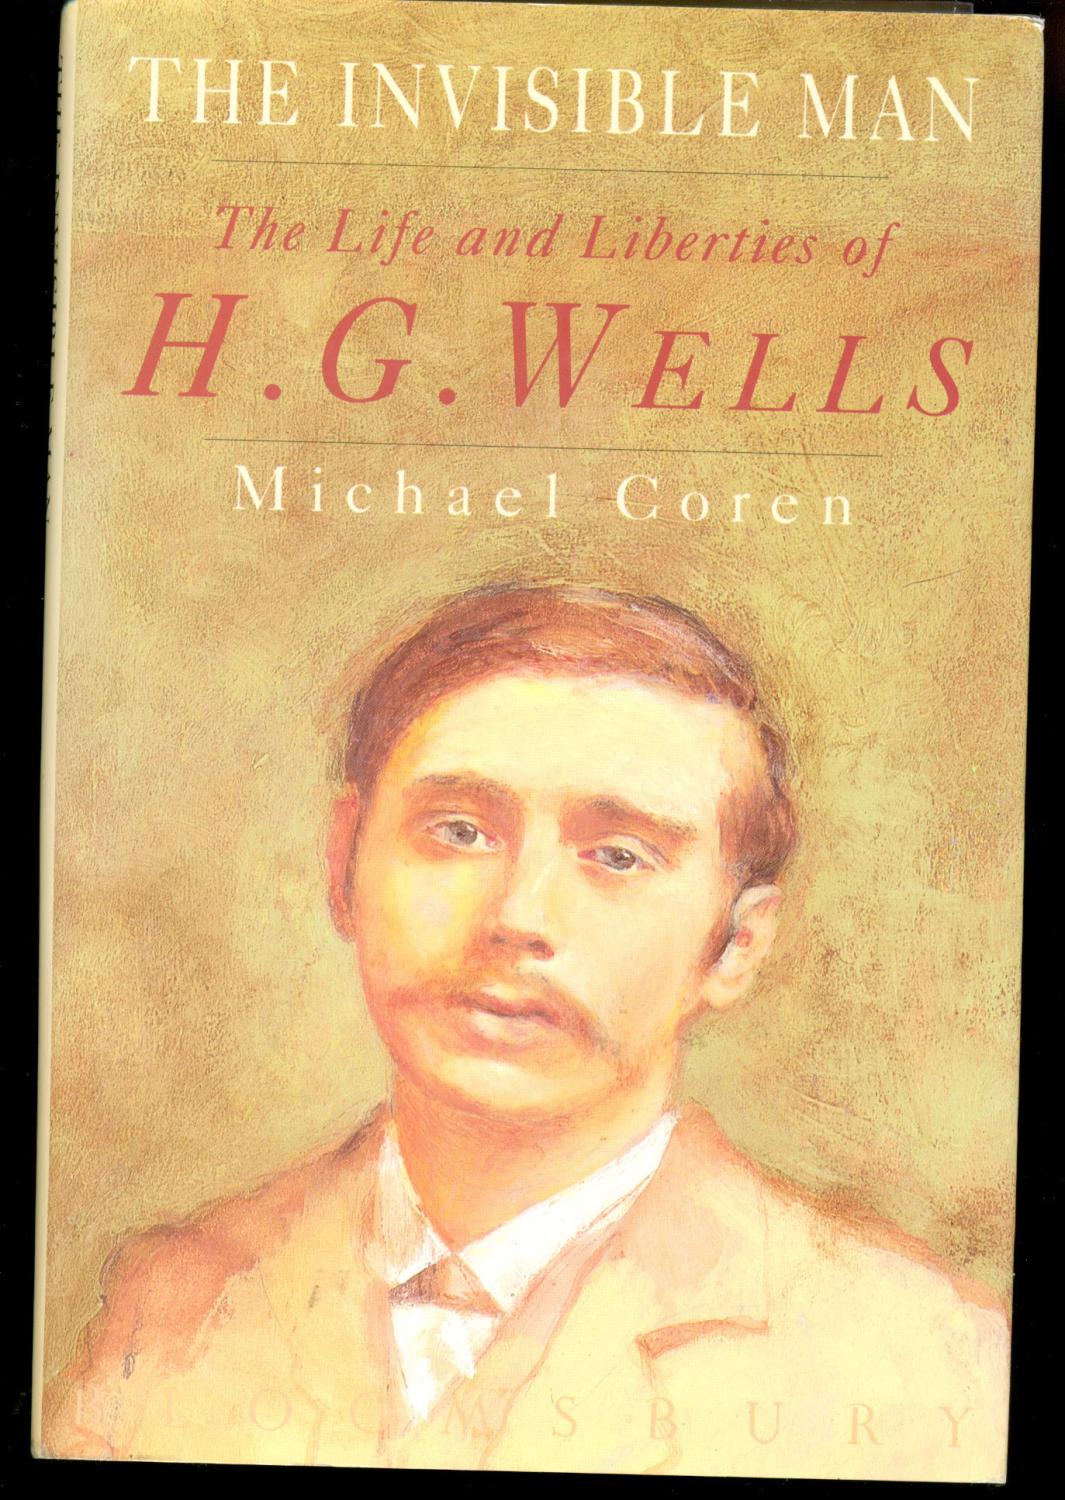 The Invisible Man: Life and Liberties of H.G. Wells